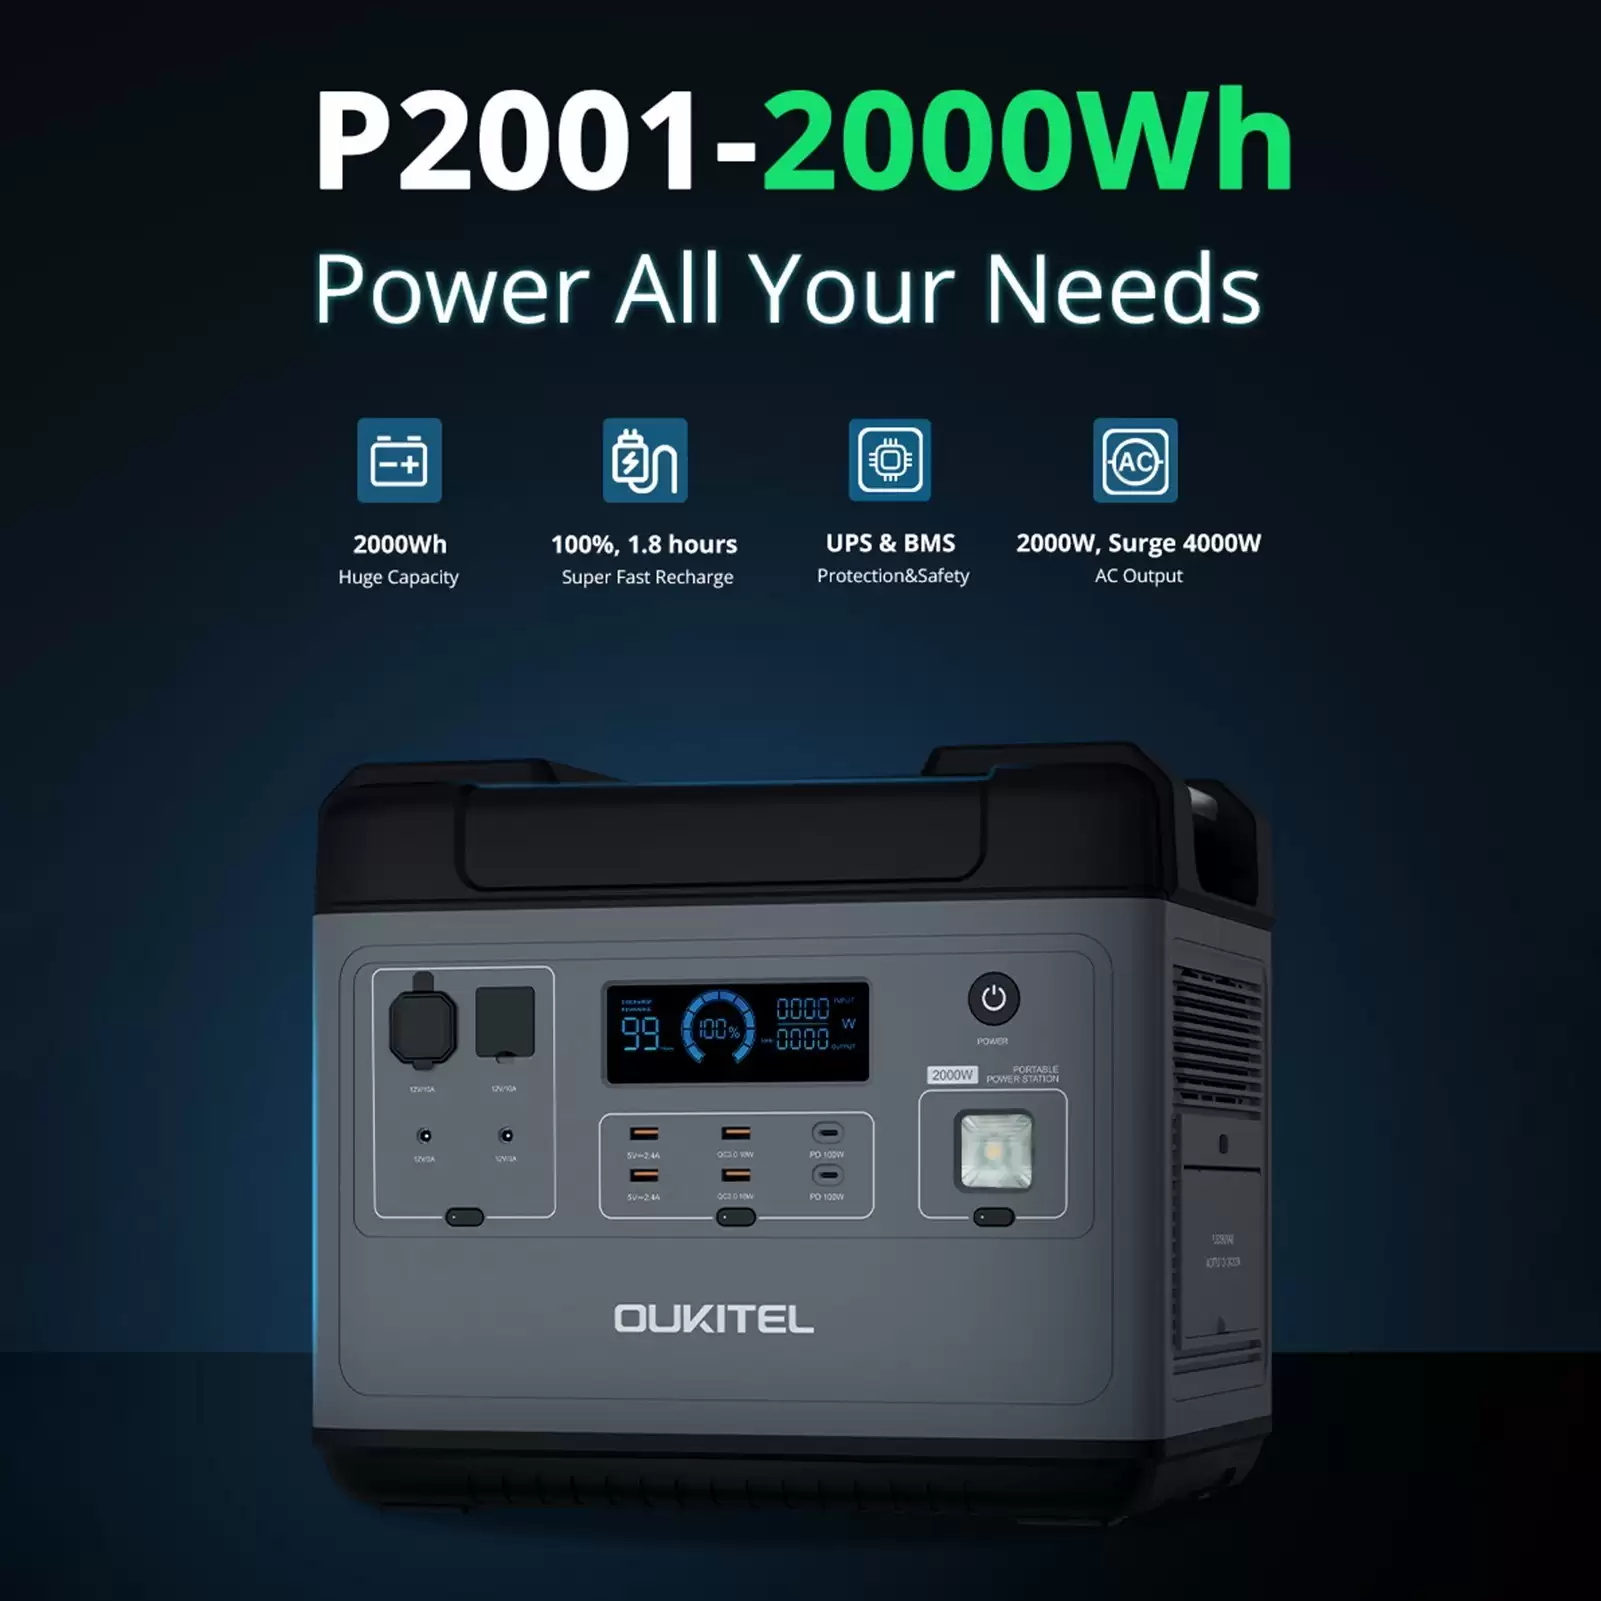 Order In Just $1342.99 Oukitel P2001e 2000w Portable Power Station 2000w Pure Sine Wave Battery ,Free Shipping With This Cafago Discount Voucher